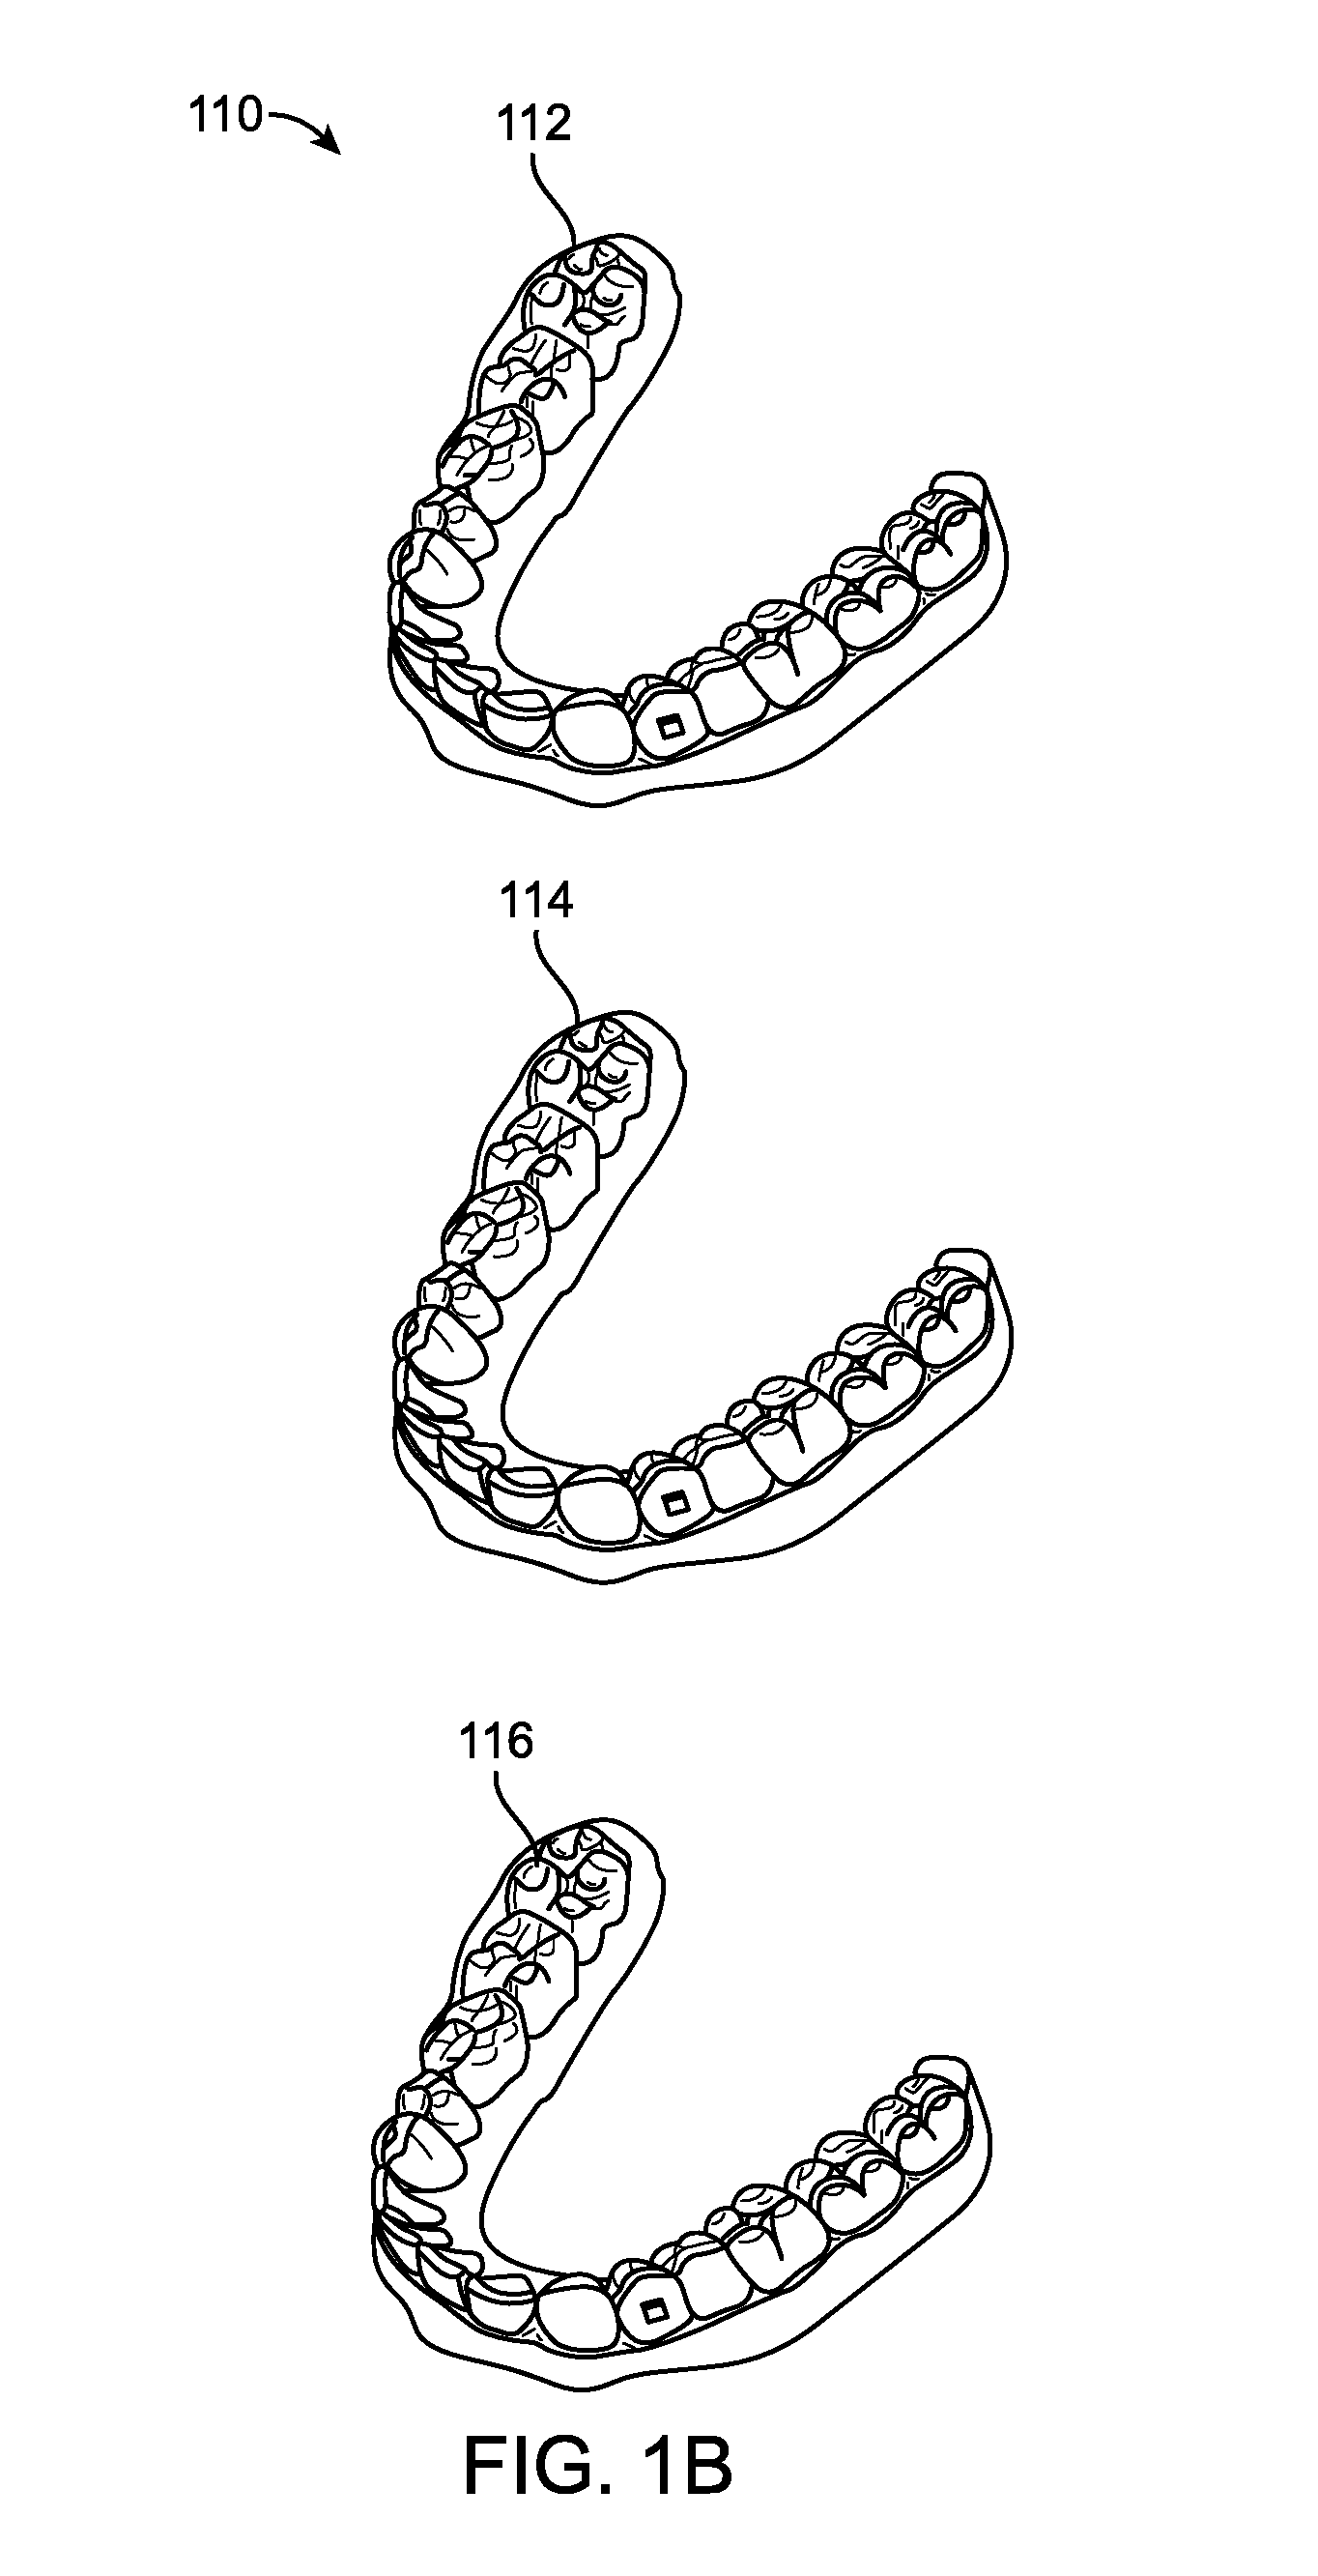 Direct fabrication of aligners for palate expansion and other applications